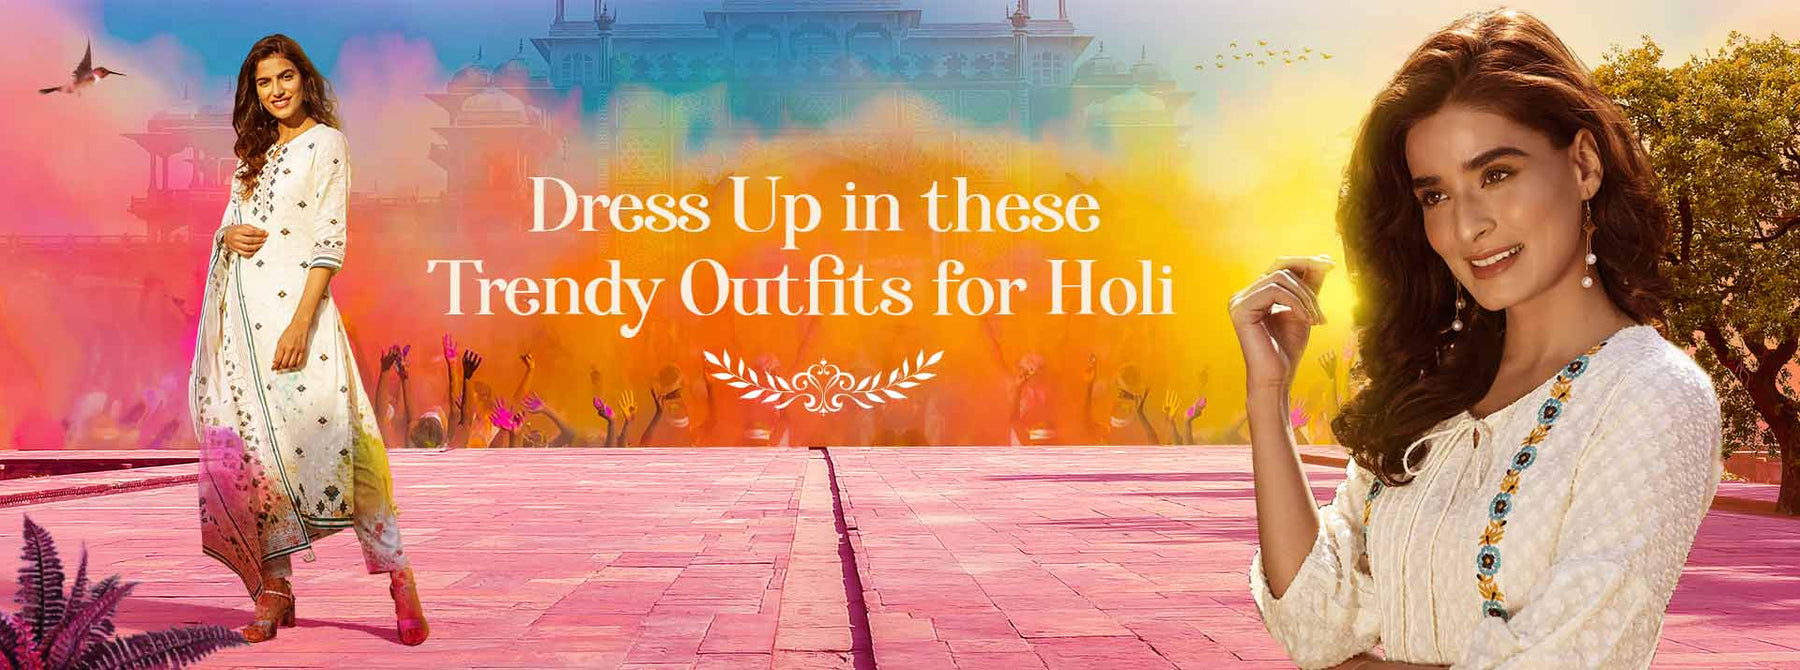 HOLI Celebration: What to wear on Holi and How to Get Ready for this Colorful Festival